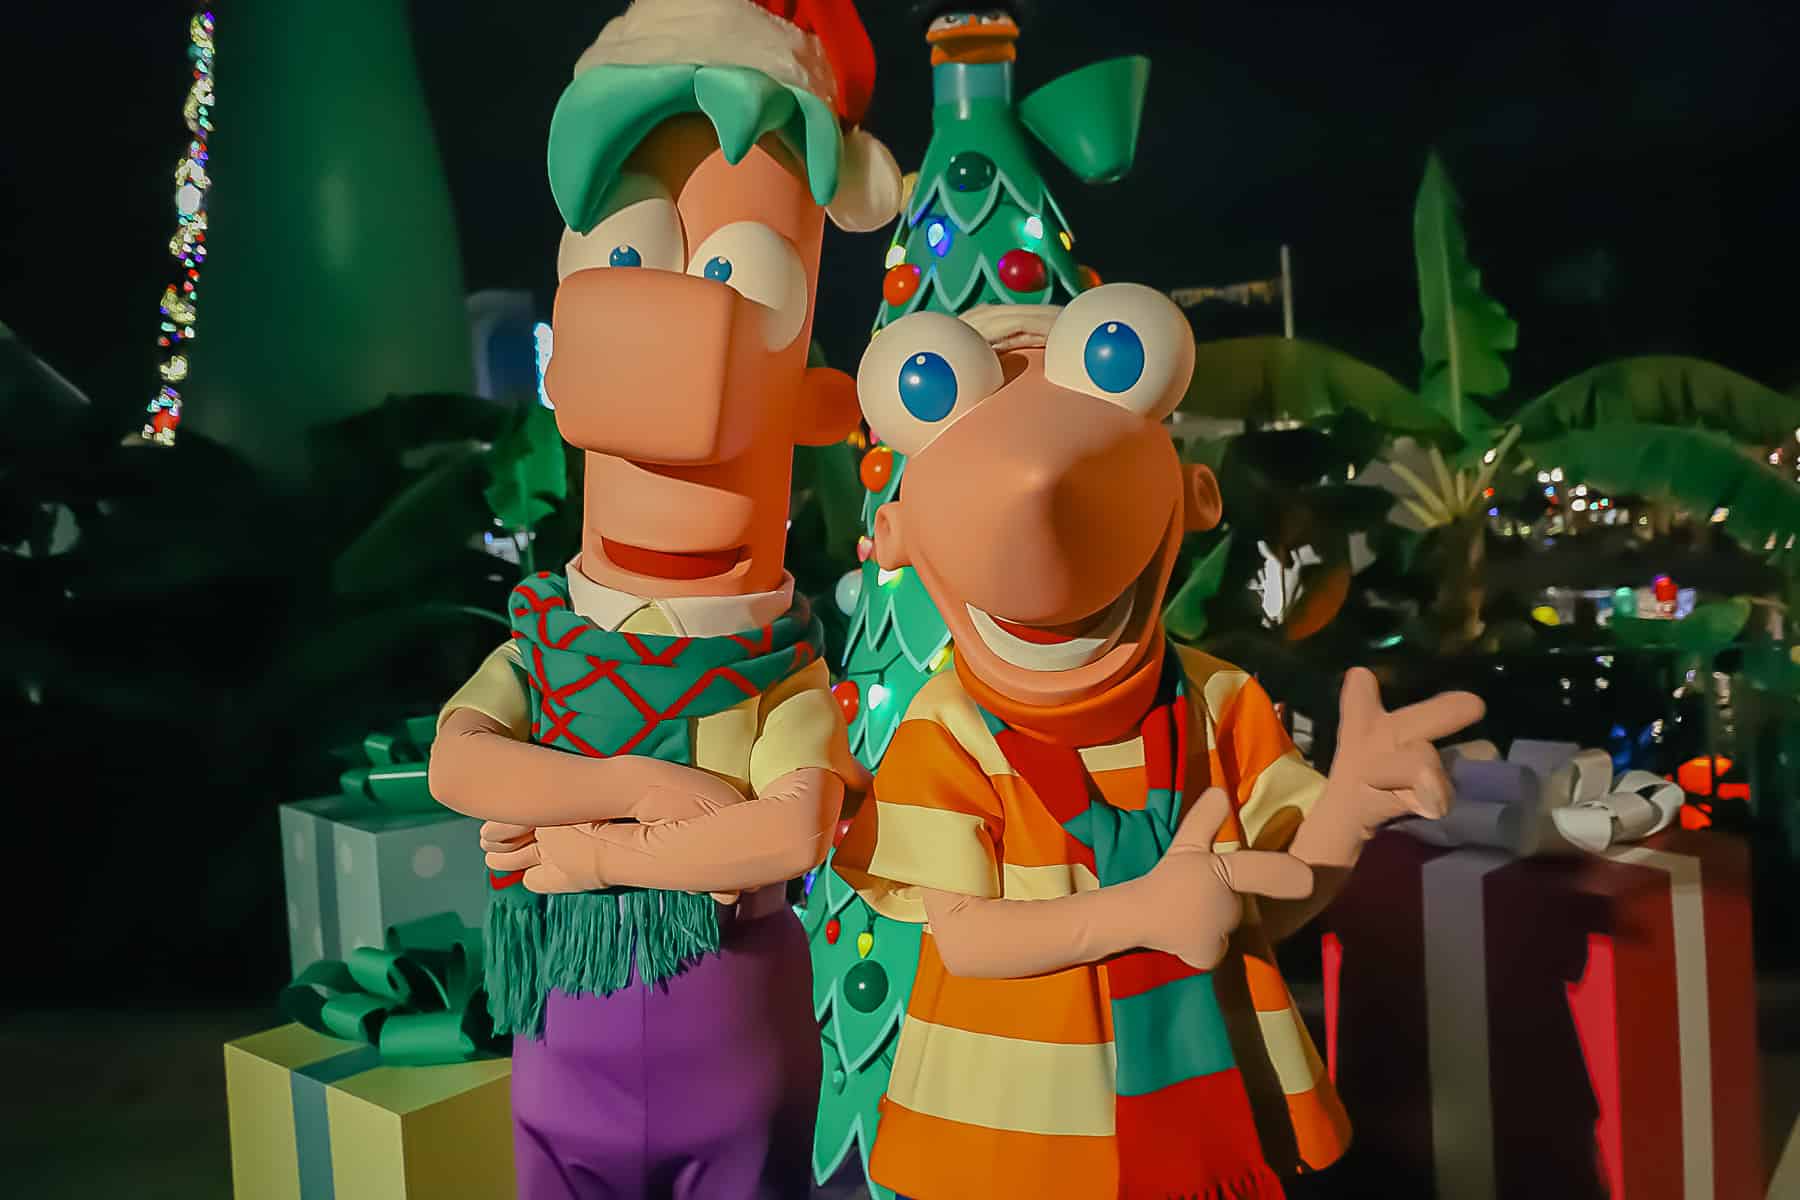 Phineas and Ferb wearing their usual outfits with holiday scarves at Jollywood Nights.